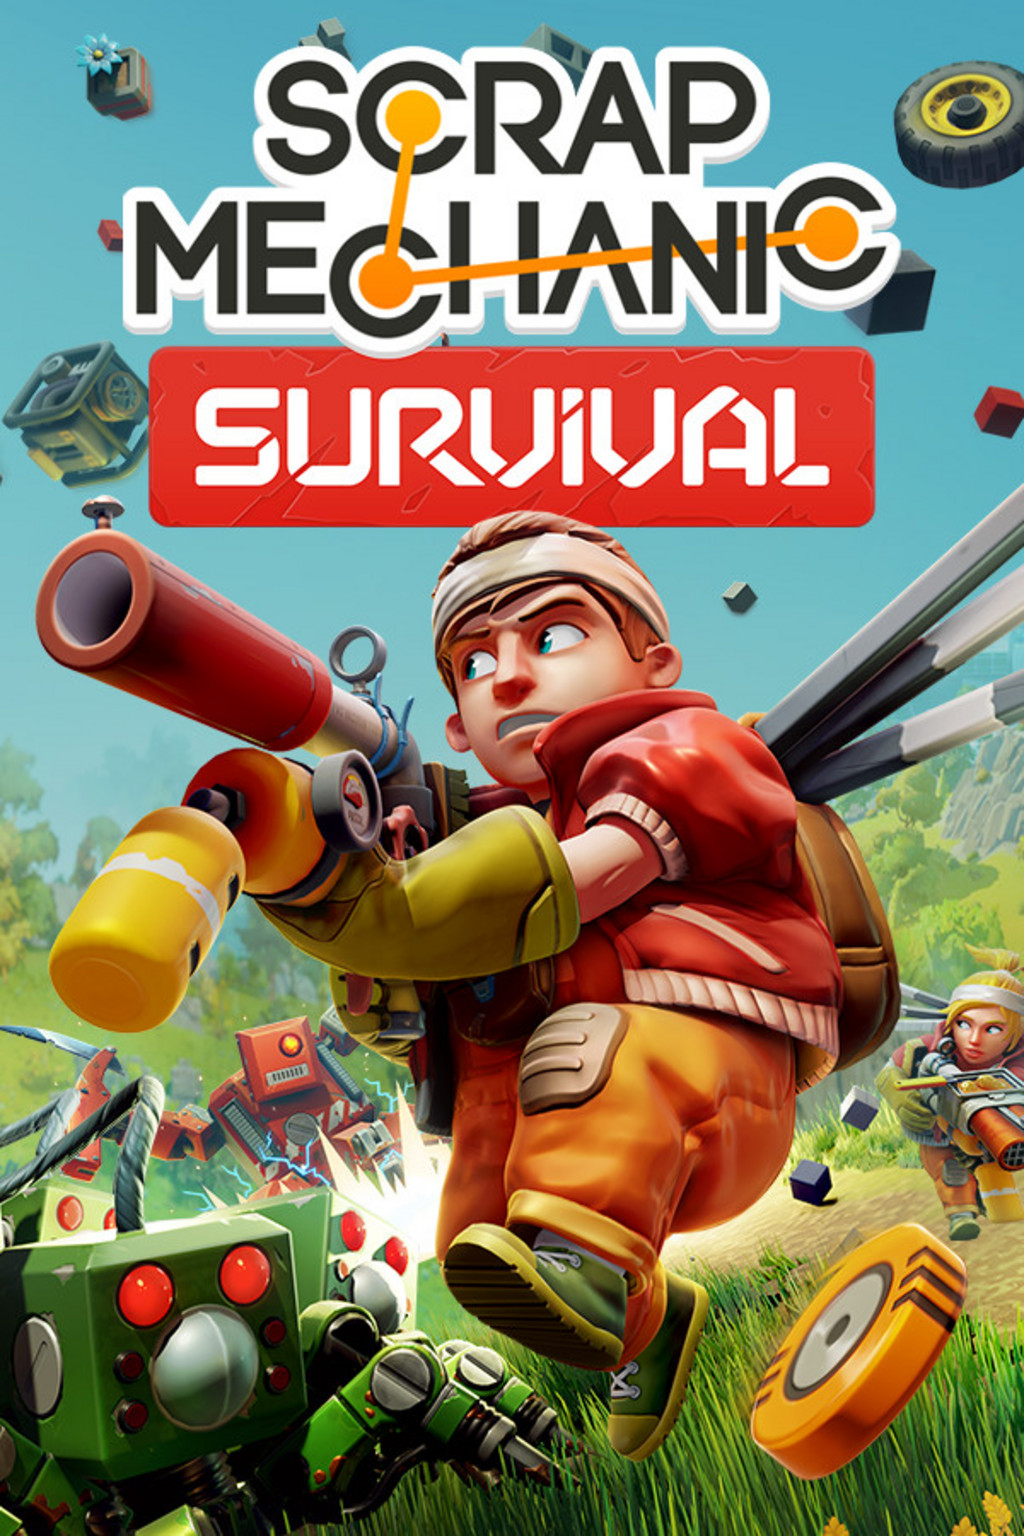 Scrap Mechanic — StrategyWiki Strategy guide and game reference wiki